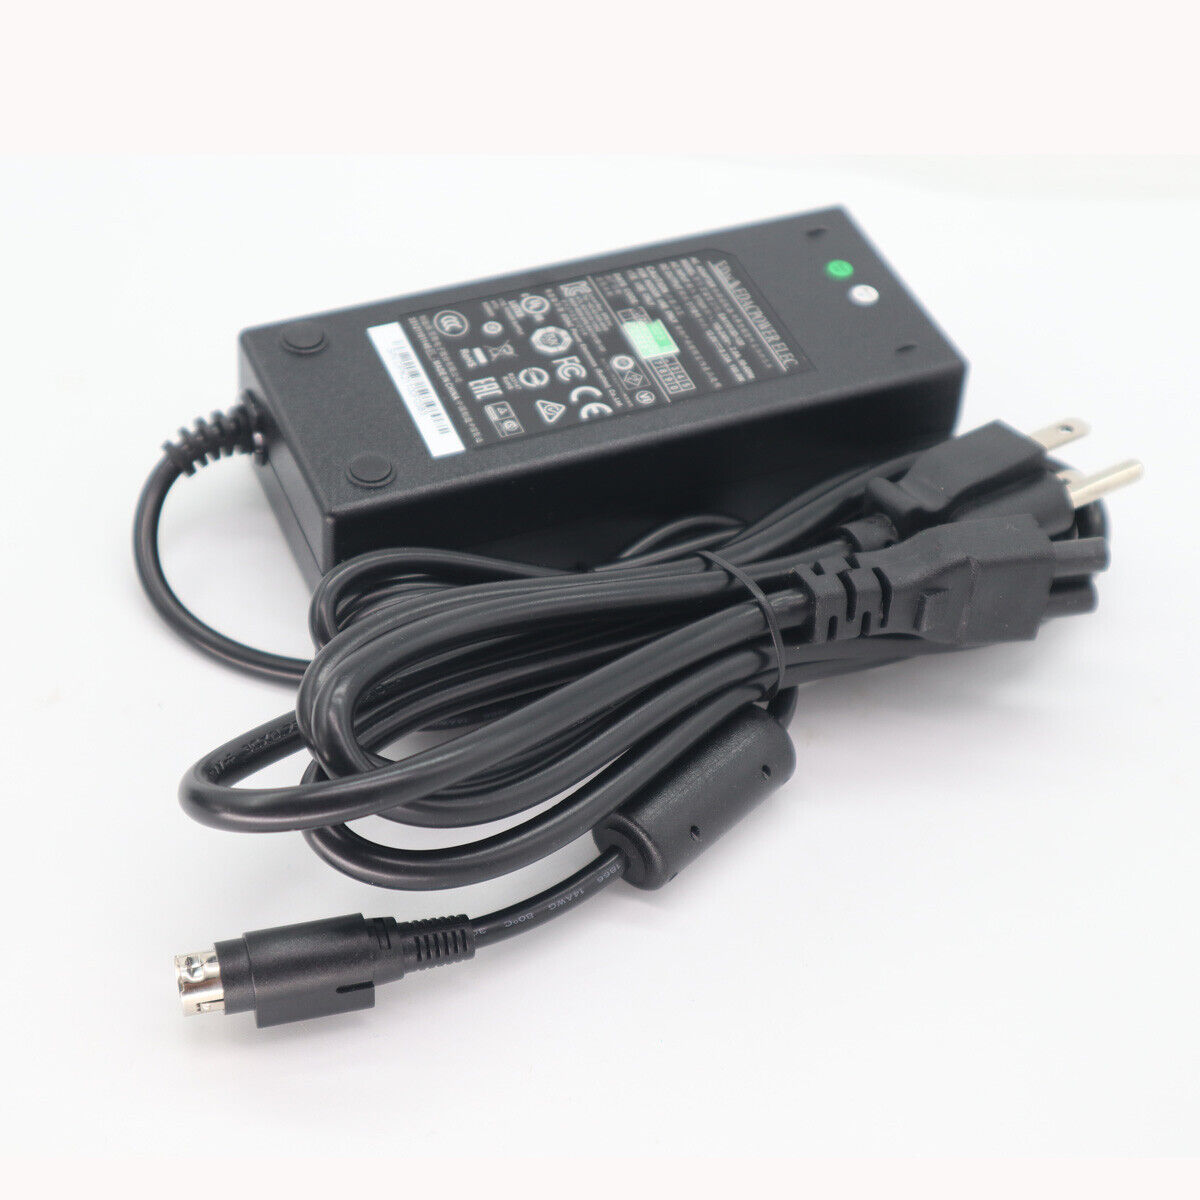 *Brand NEW*Genuine FSP 12V 12.5A 150W AC Adapter for Synology DS411j DS411+II DS412+ DS413 DS413j Power Supply